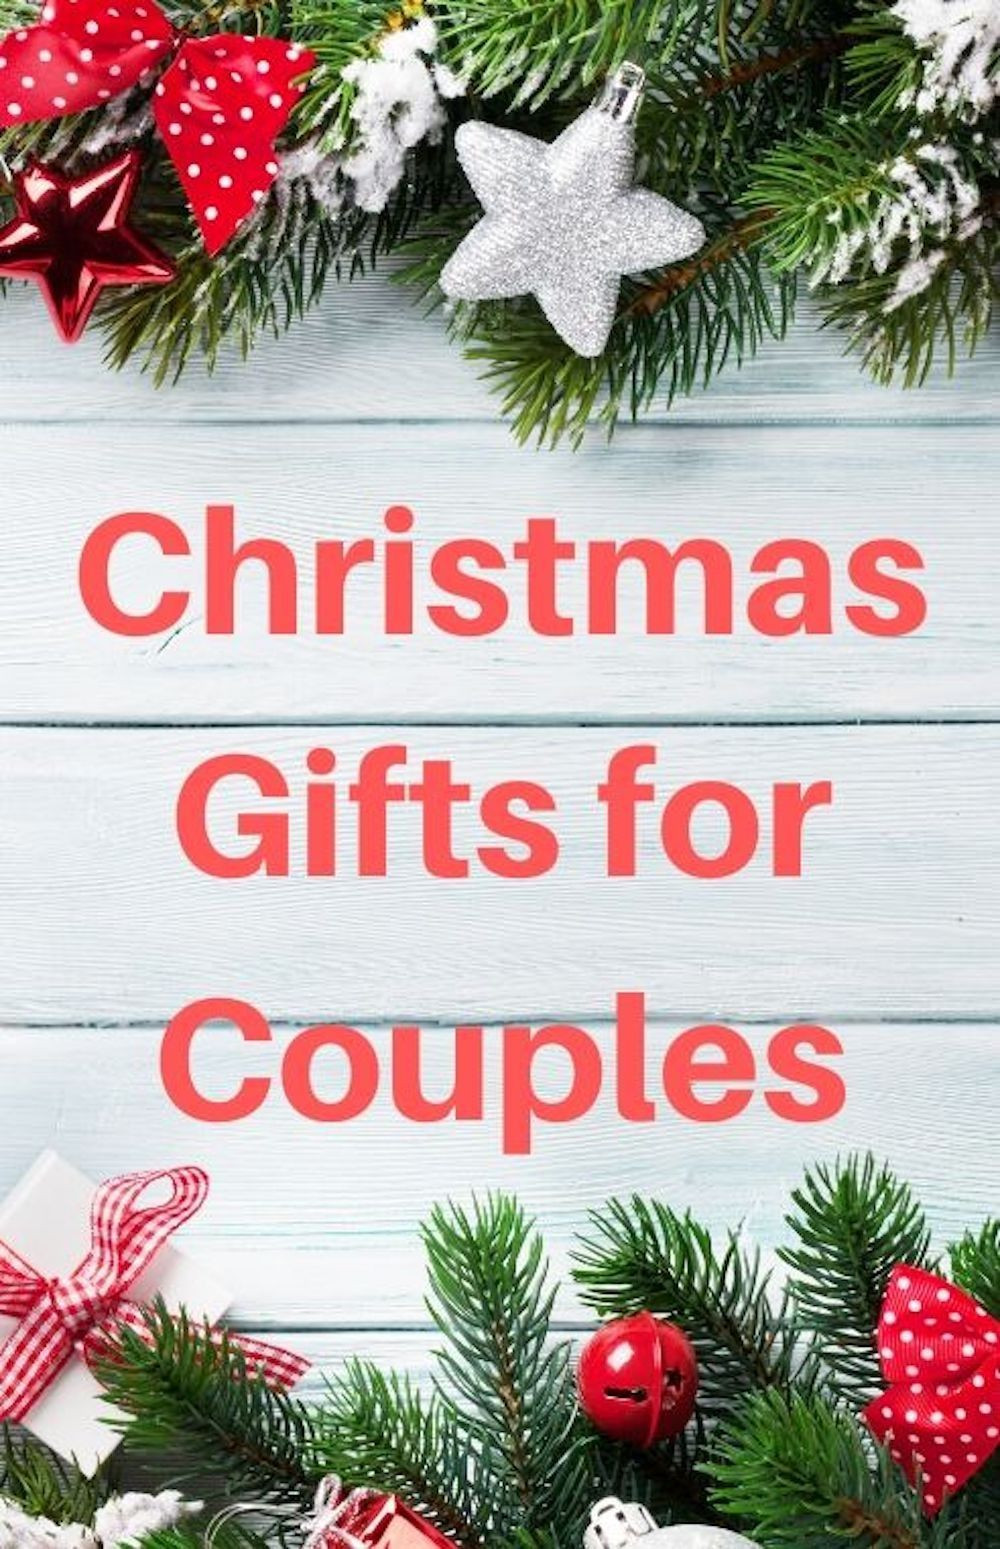 Holiday Gift Ideas Couples
 Christmas Gift Ideas for Couples